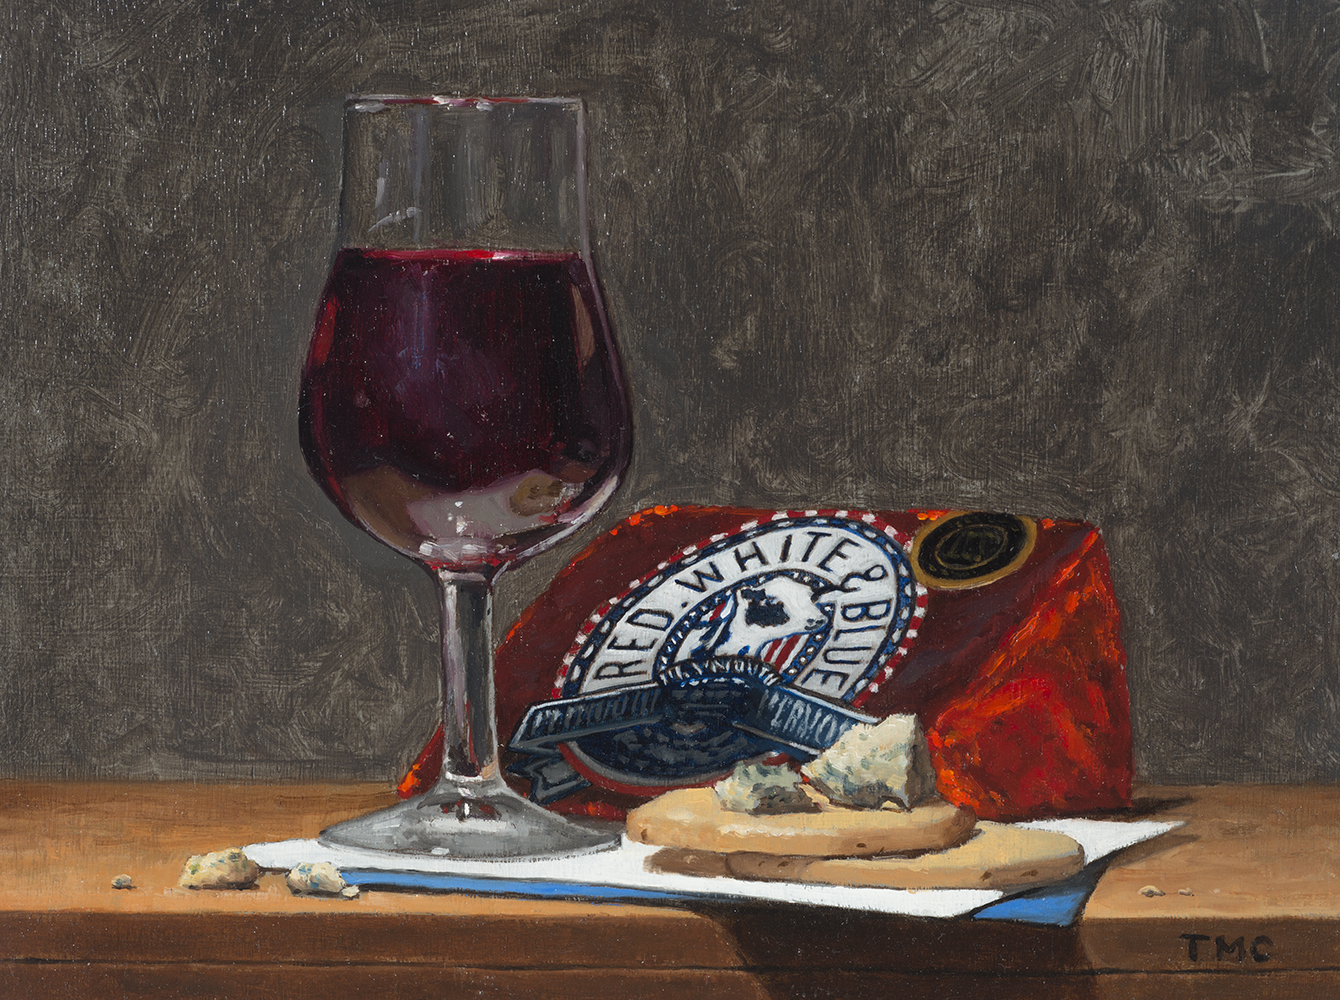 todd_m_casey_tc1096_blue_cheese_and_port_wine.jpg